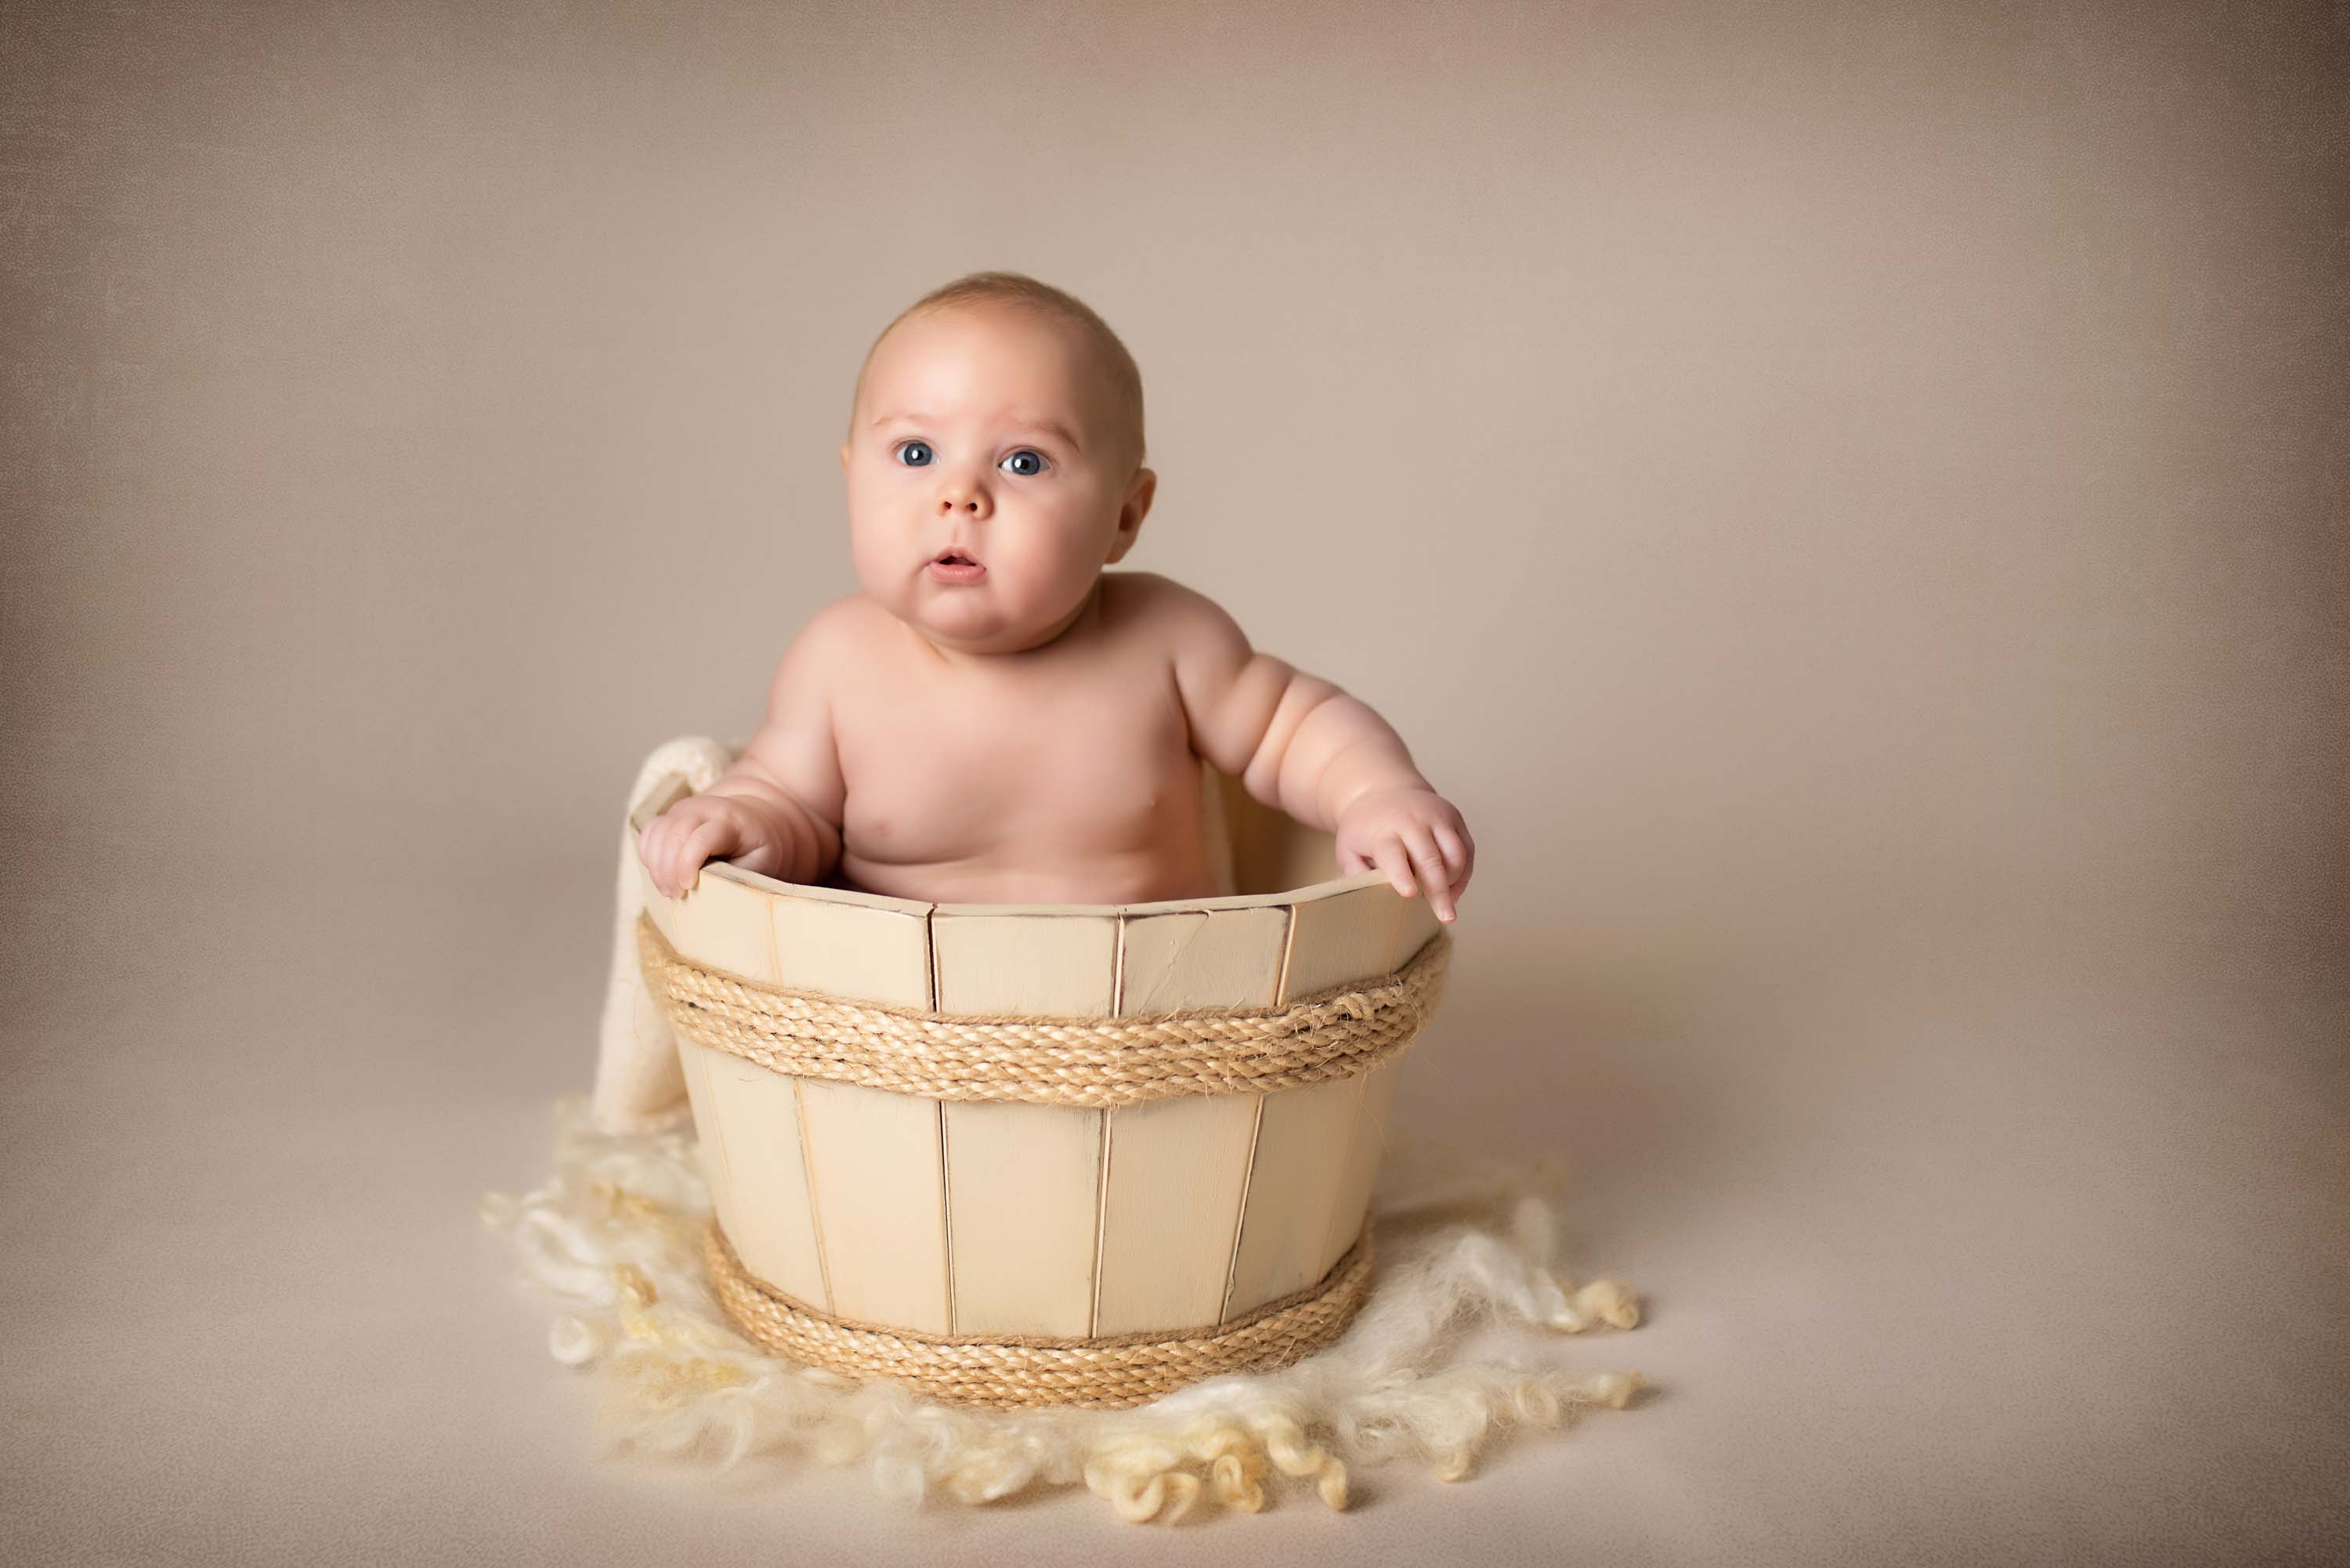 4 month old boy sitting in a wooden barrel for his baby photos